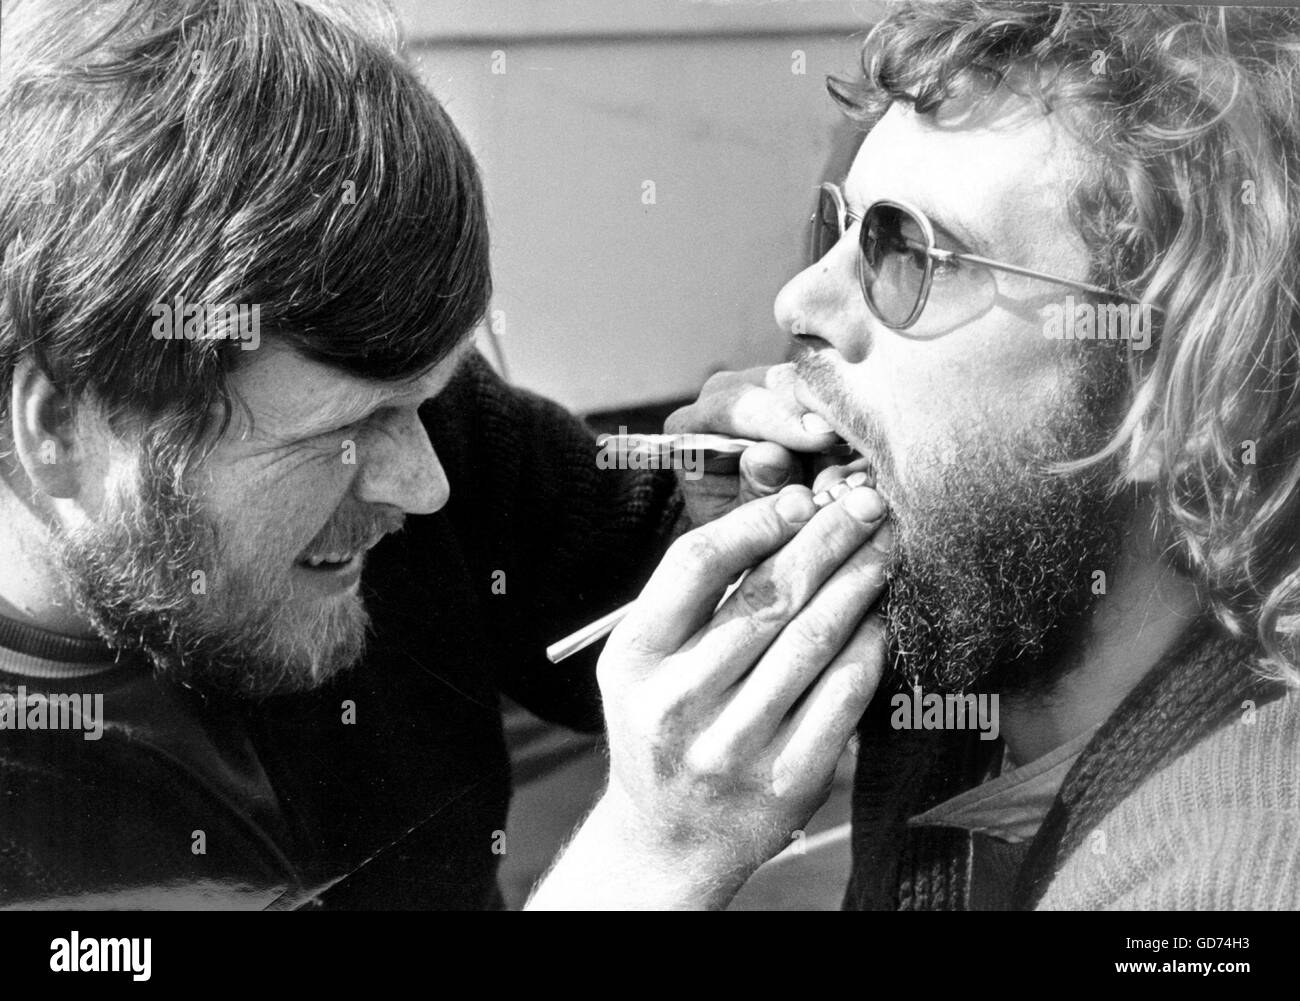 AJAX NEWS PHOTOS. 30TH APRIL, 1974. PORTSMOUTH, ENGLAND. - WHITBREAD ROUND THE WORLD RACE - (L-R) GERT FINDEL OF DUSSELDORF, STUDENT DENTIST ABOARD GERMAN YACHT PETER VON DANZIG, DEMONSTRATES HOW HE KEPT TEETH OF YACHT'S 9 CREW IN GOOD SHAPE DURING LAST LEG OF RACE. GUINEA PIG IS CREWMAN TOMAS REUTHER, MEDICAL STUDENT. PHOTO:JONATHAN EASTLAND/AJAX  REF:PEO VON DANZIG WRWR 1974 Stock Photo